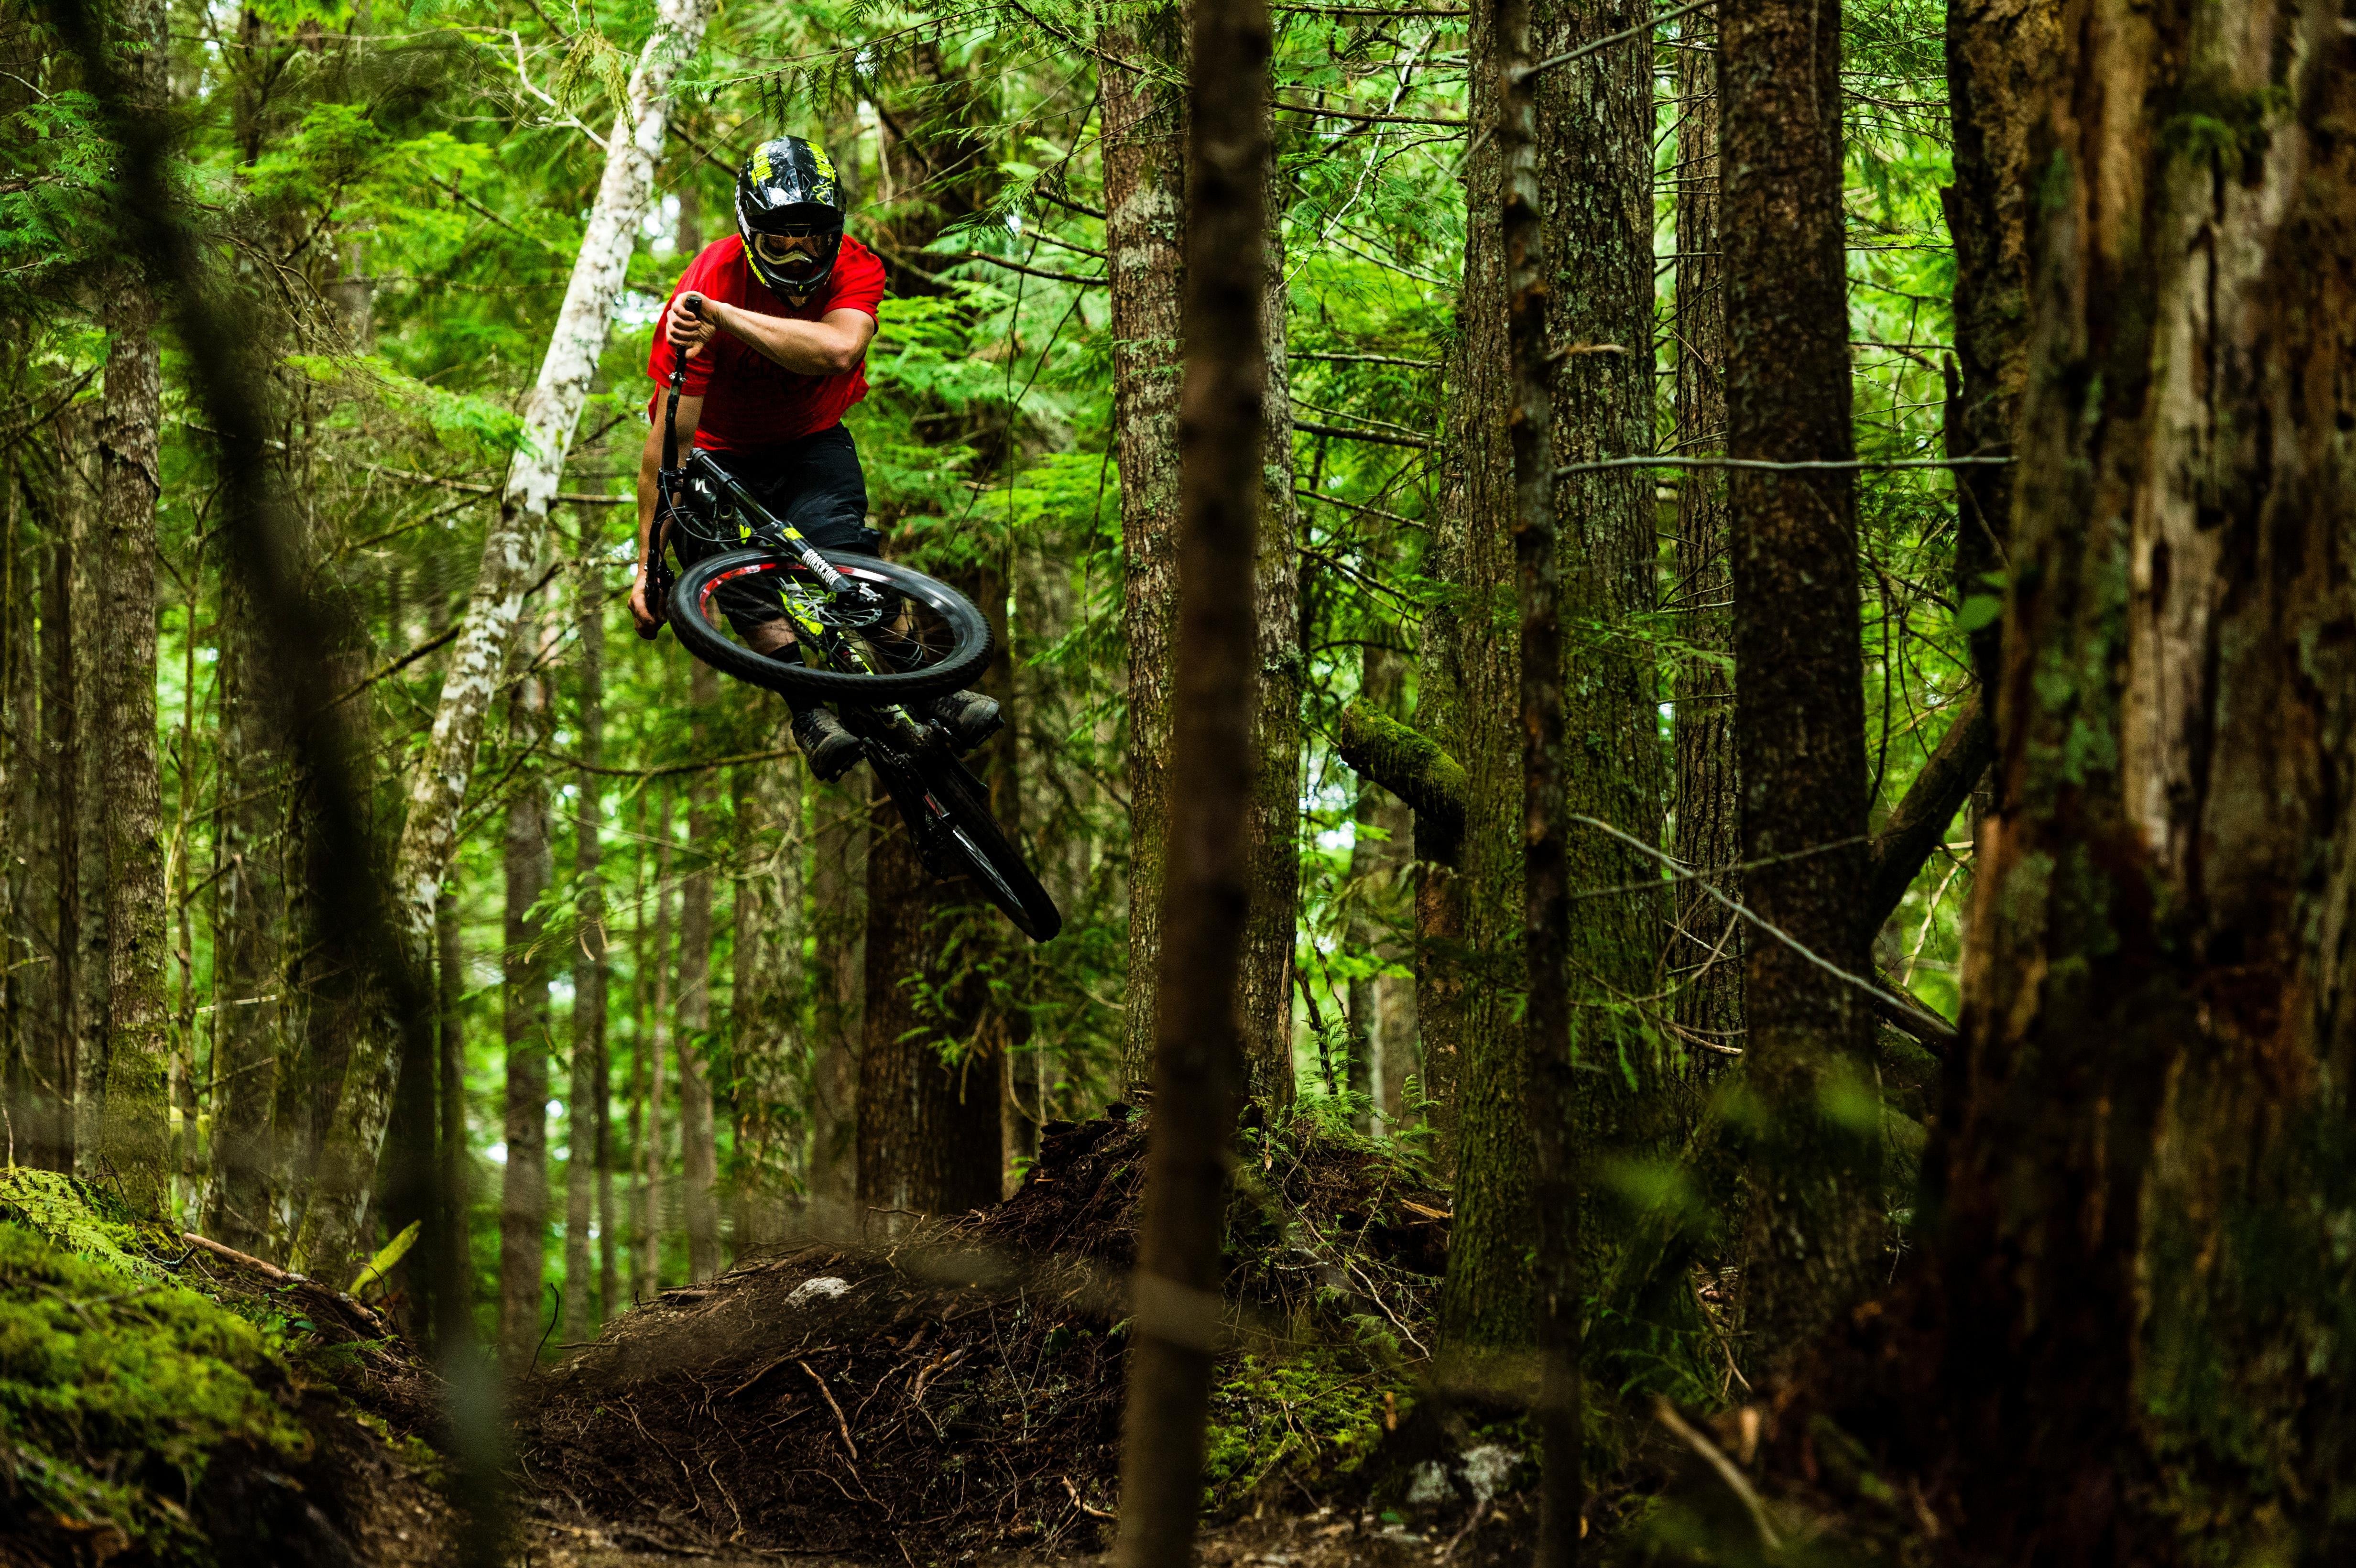 Best bike parks in the world: Top 10 you have to visit